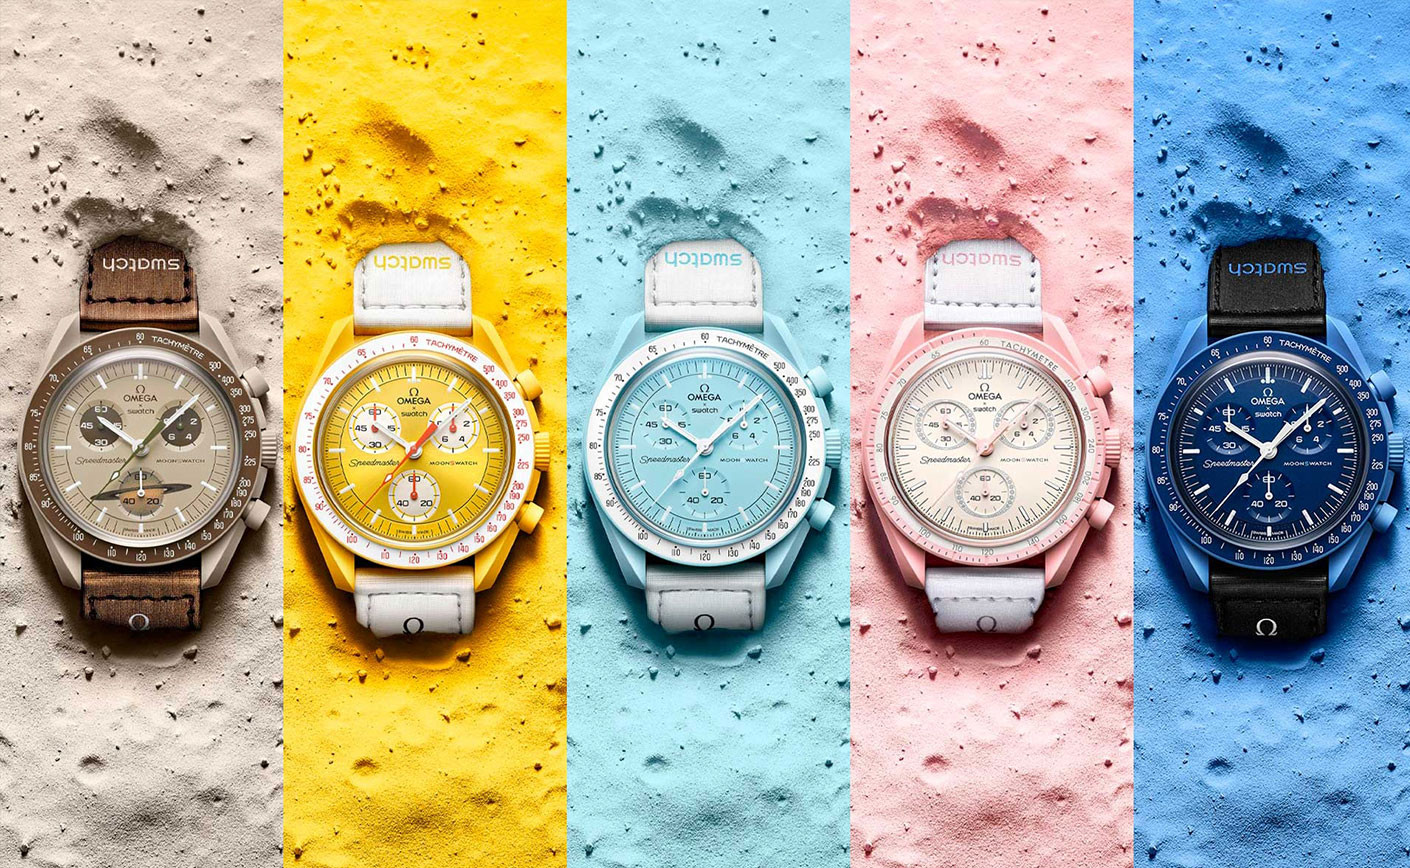 Swatch x Omega: Collectibles or successful marketing?